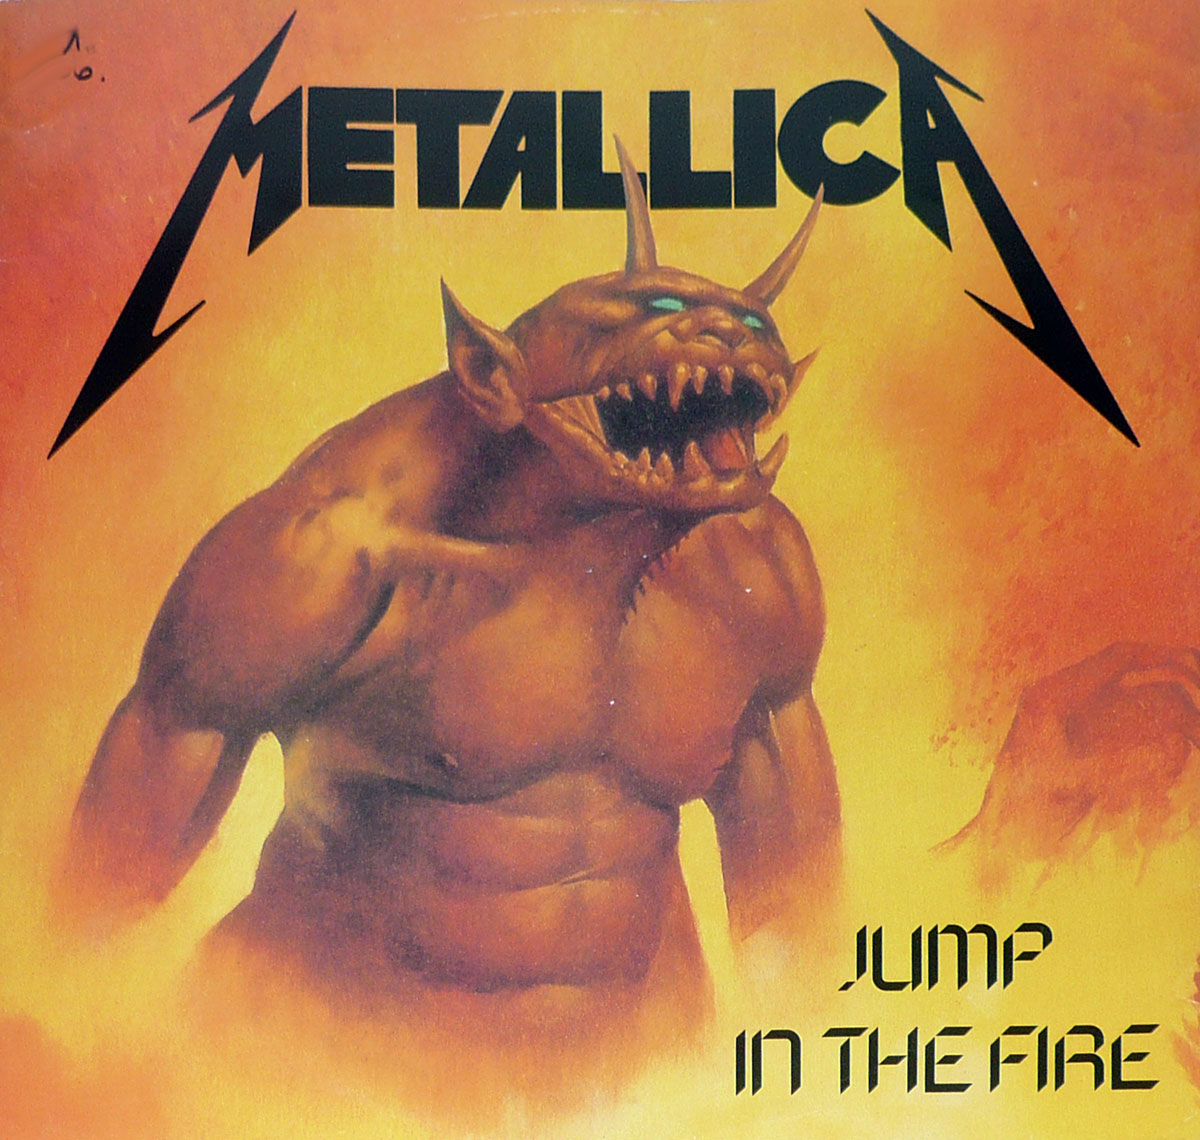 High Resolution Photo METALLICA JUMP IN THE FIRE england Vinyl Record